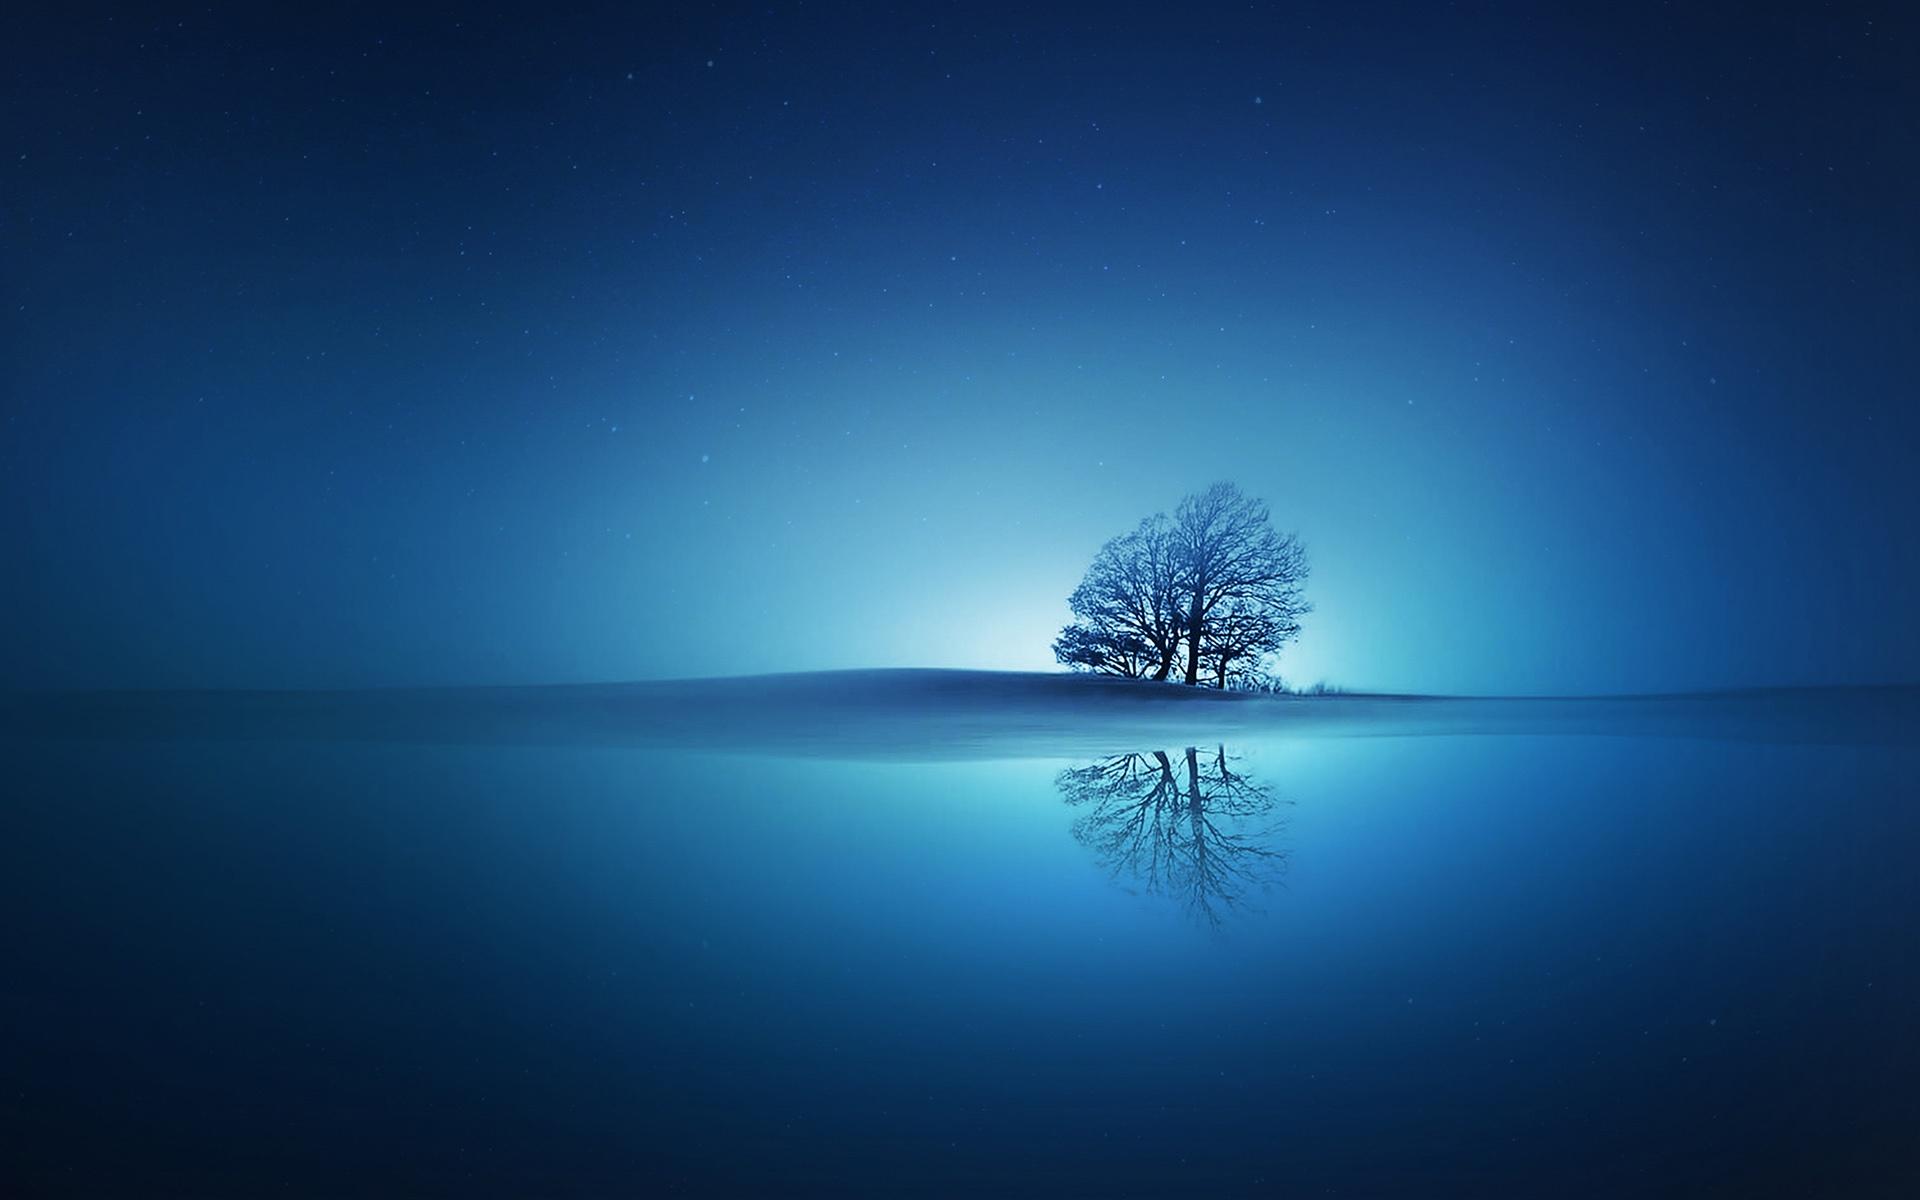 Blue Reflections Wallpaper in jpg format for free download